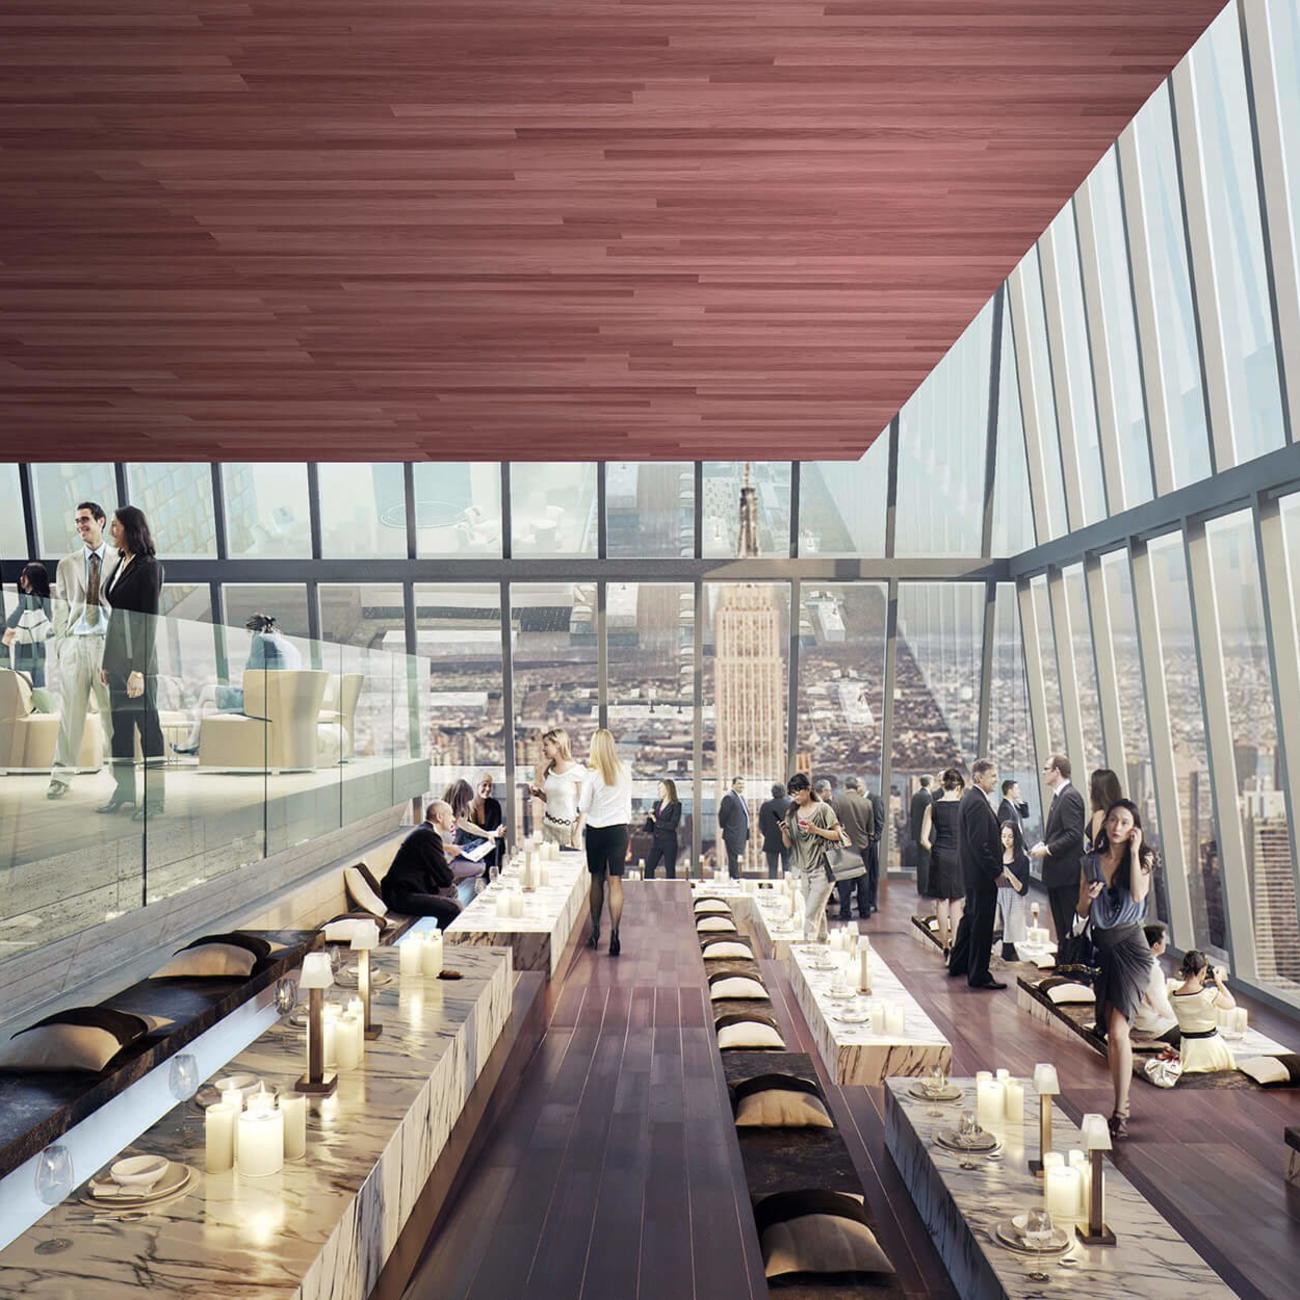 NYC: The Edge Observation Deck at Hudson Yards